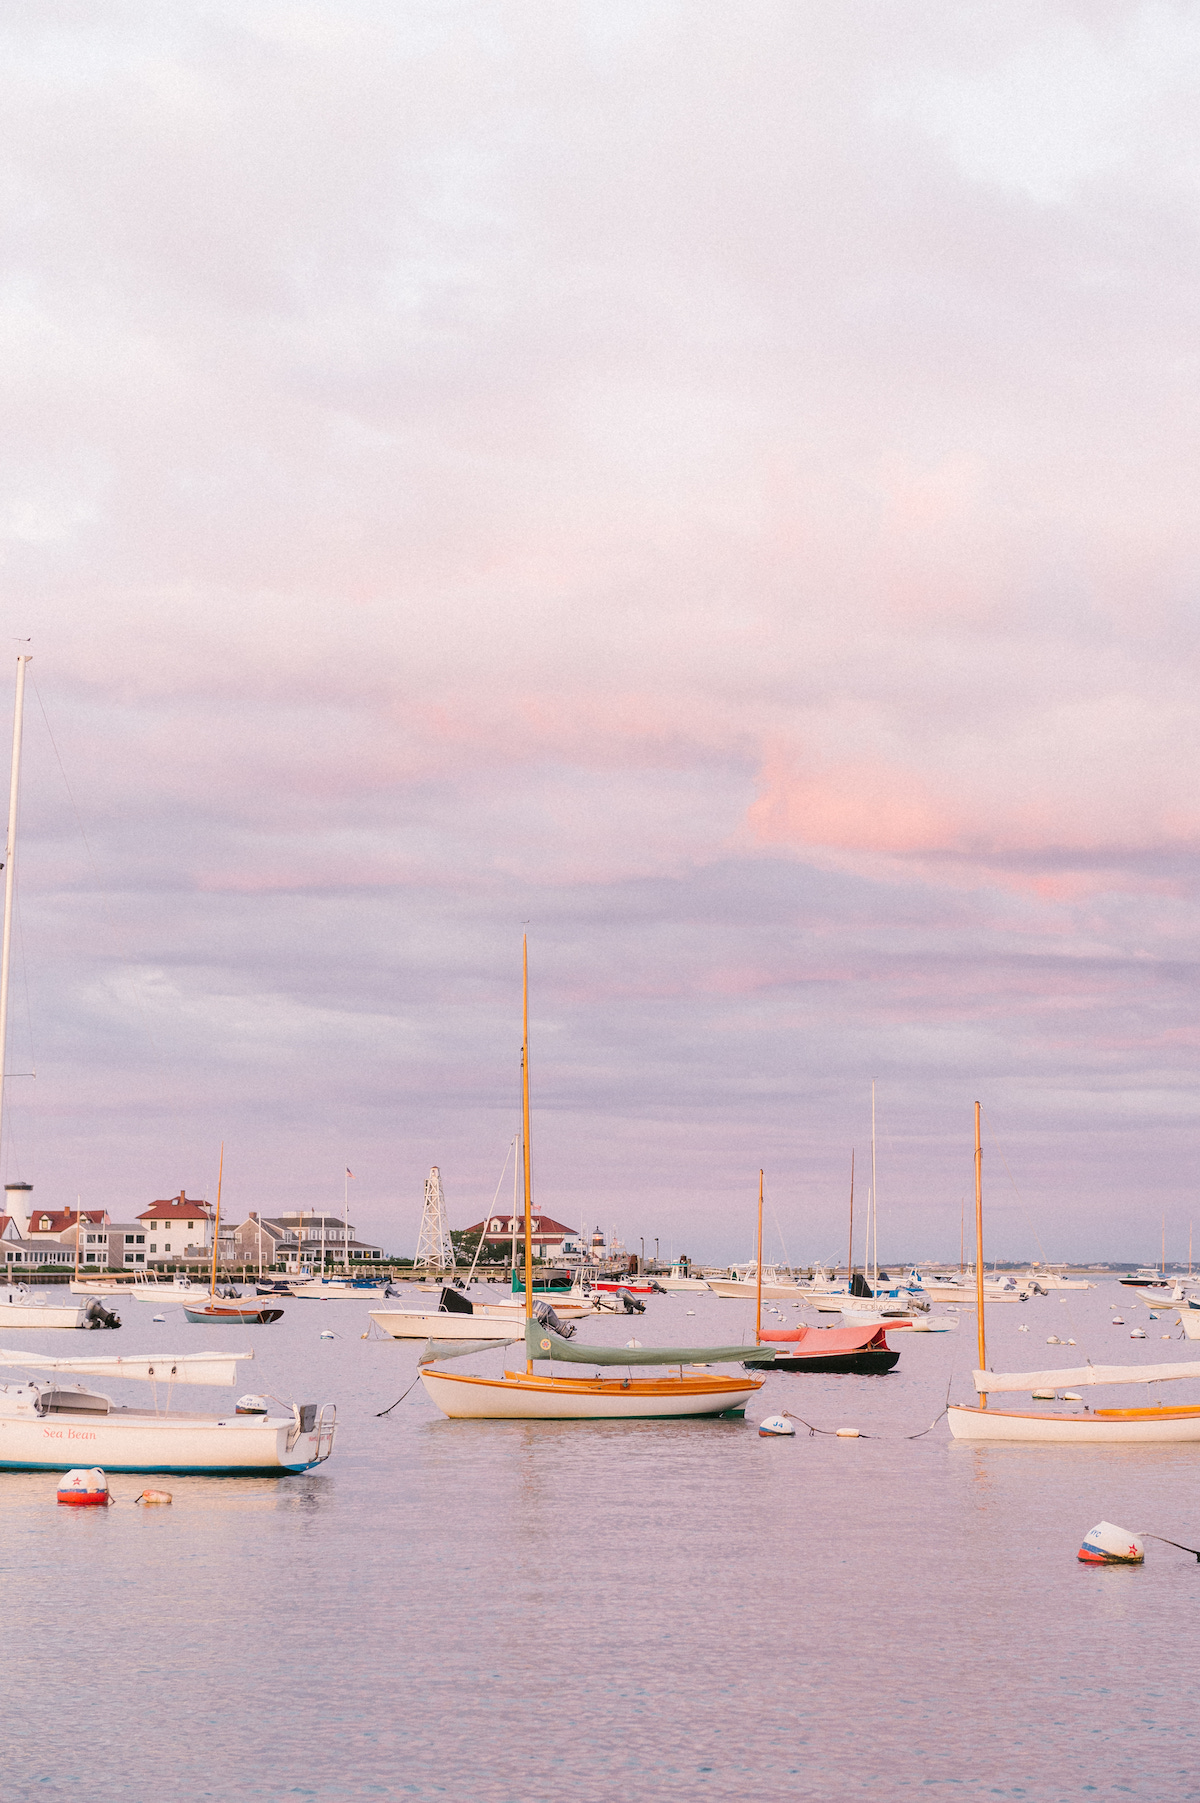 Sailboats moored in a calm harbor at sunset with pastel pink and blue sky, with buildings and a crane in the background.